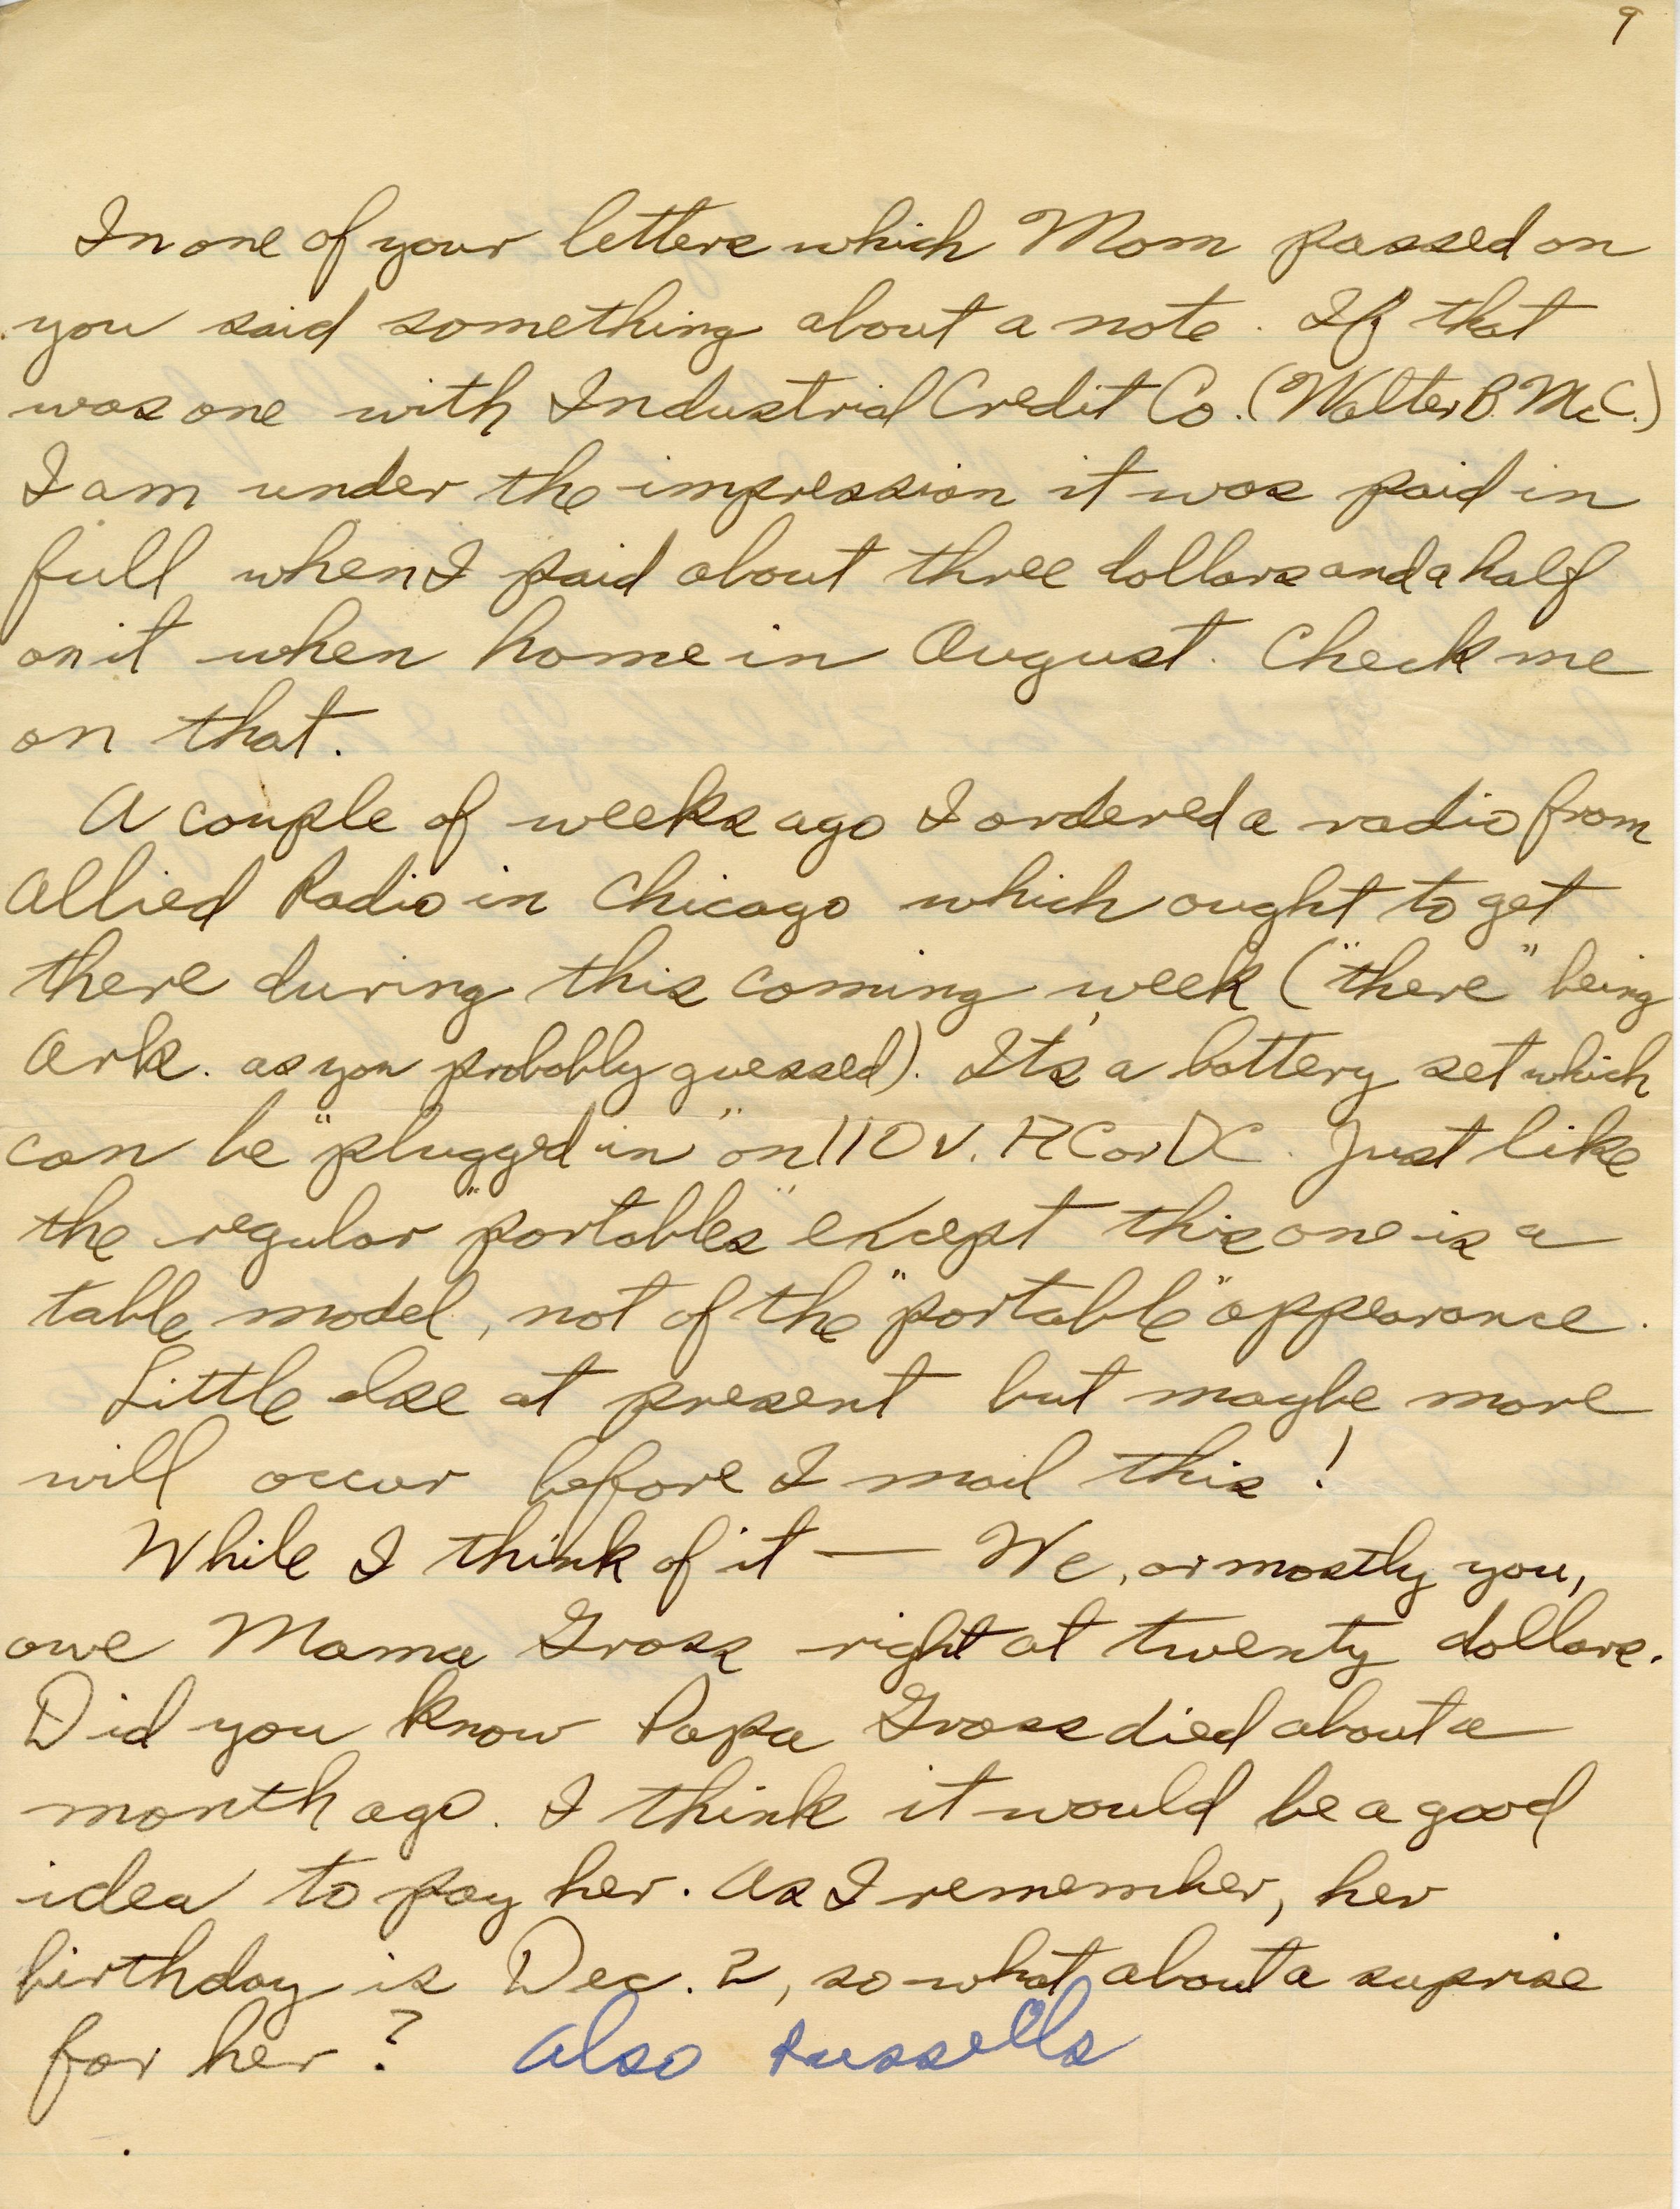 Primary Image of Letter From Elisha 